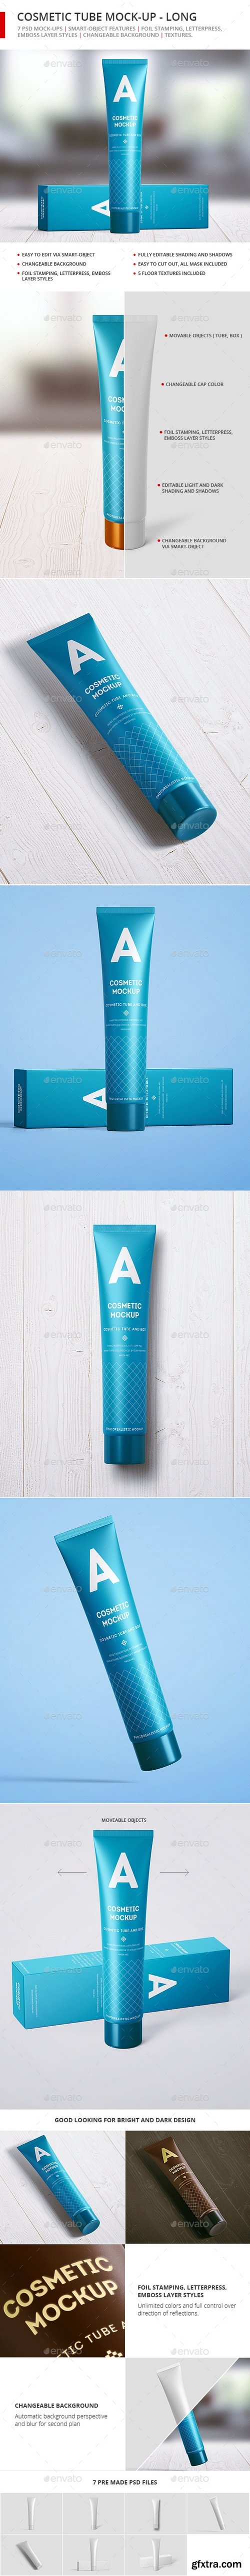 Graphicriver - Cosmetic Tube Mock-up - Long 21306272